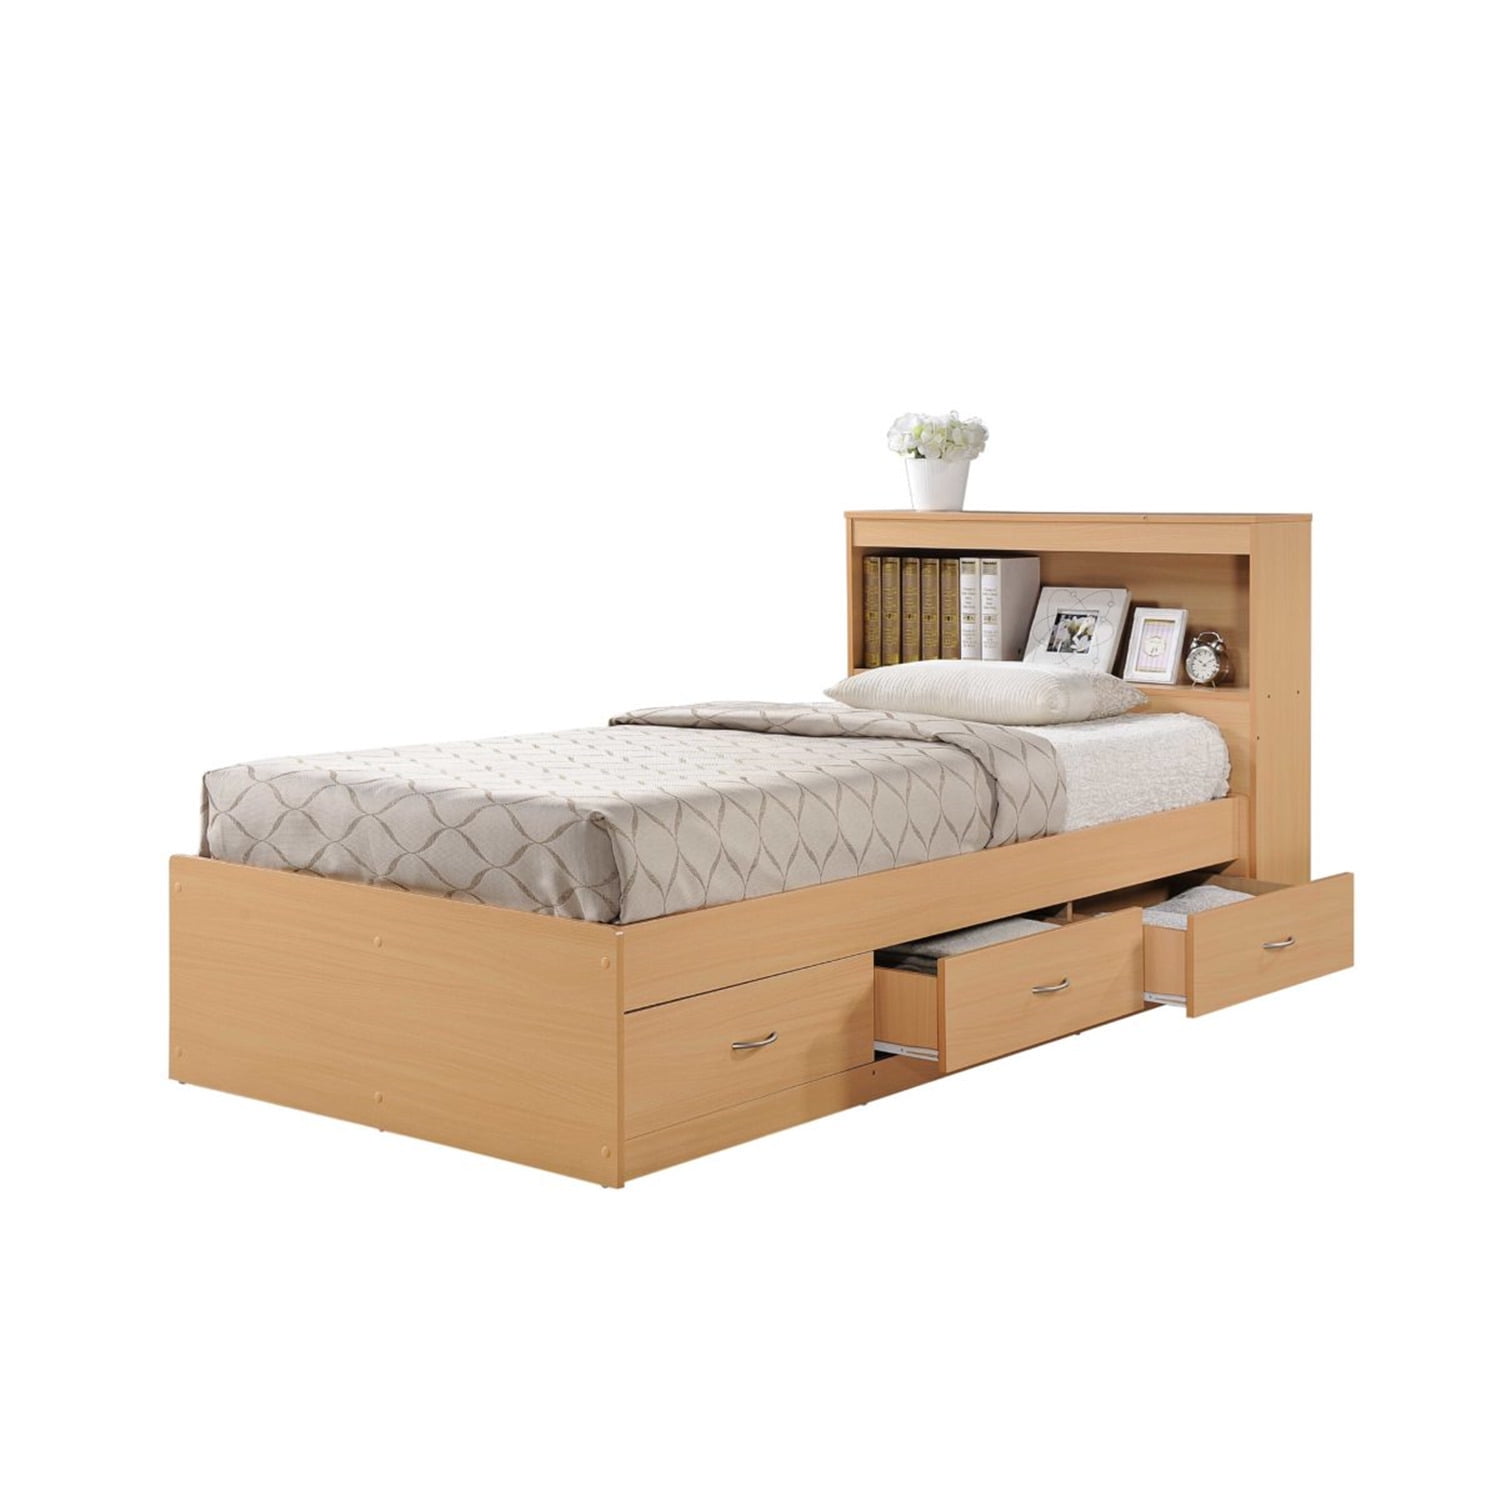 Hodedah Twin Size Captain Bed With 3, Full Size Captains Bed Frame With Headboards